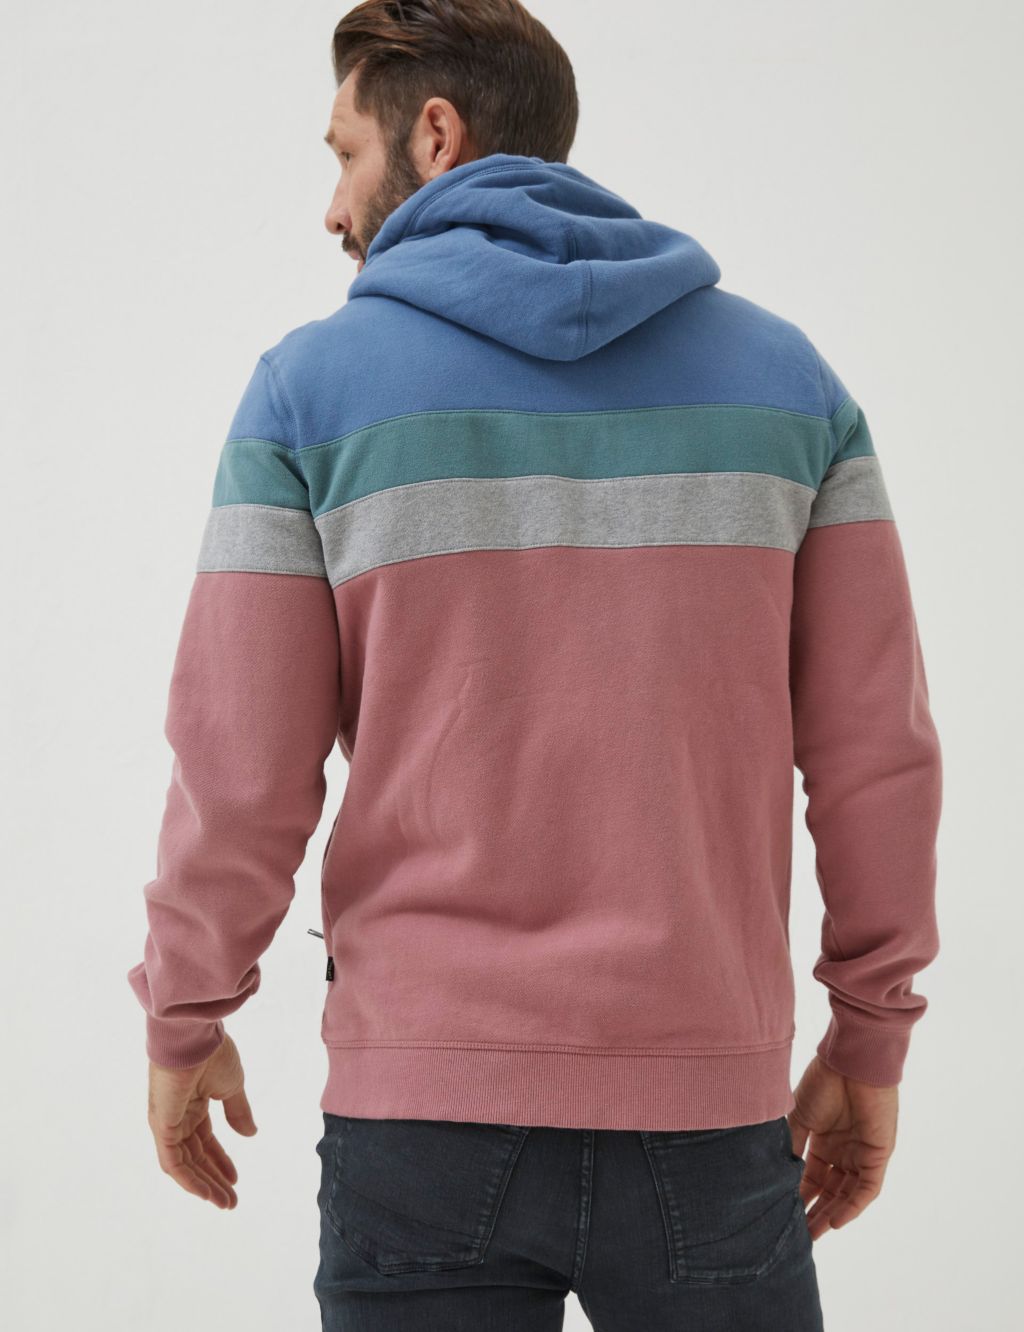 Pure Cotton Striped Zip Up Hoodie image 3